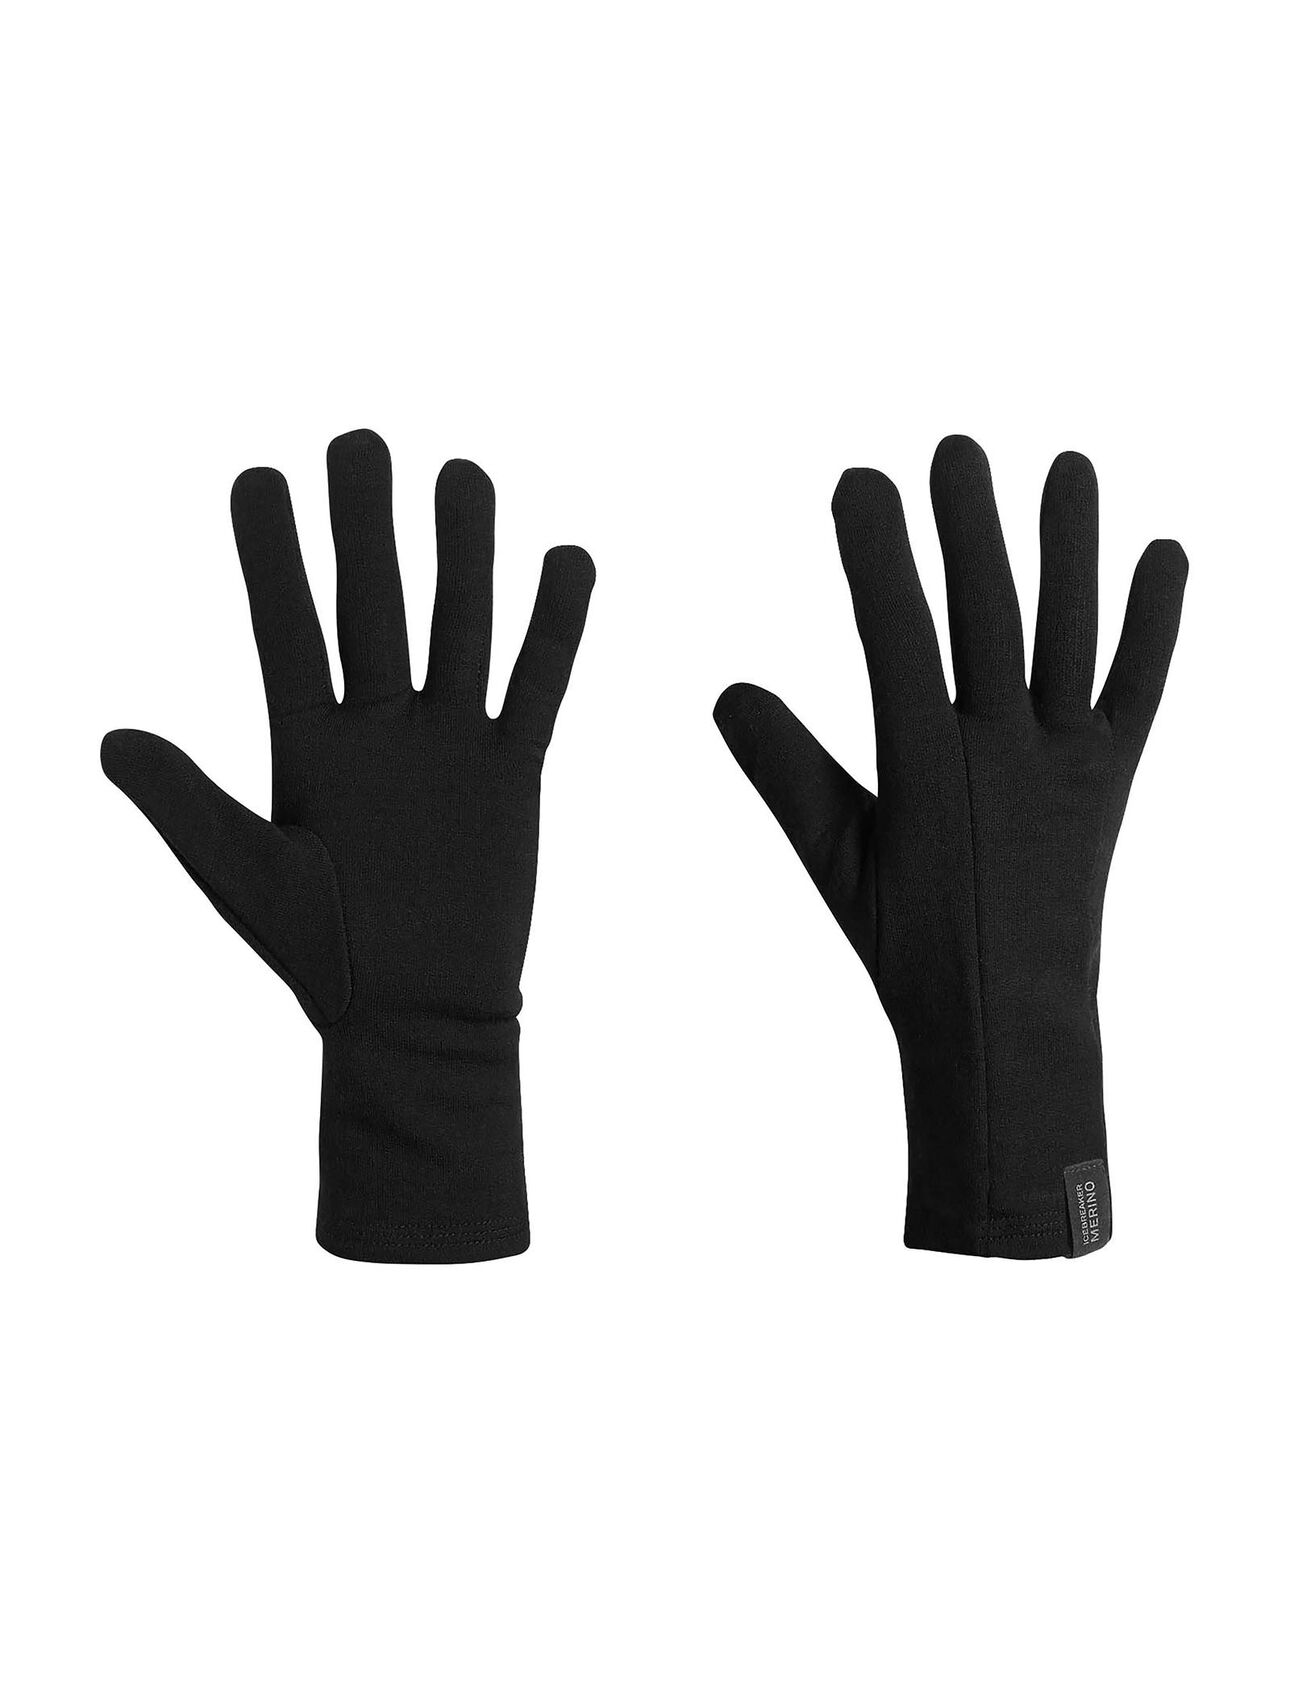 Apex Glove Liners